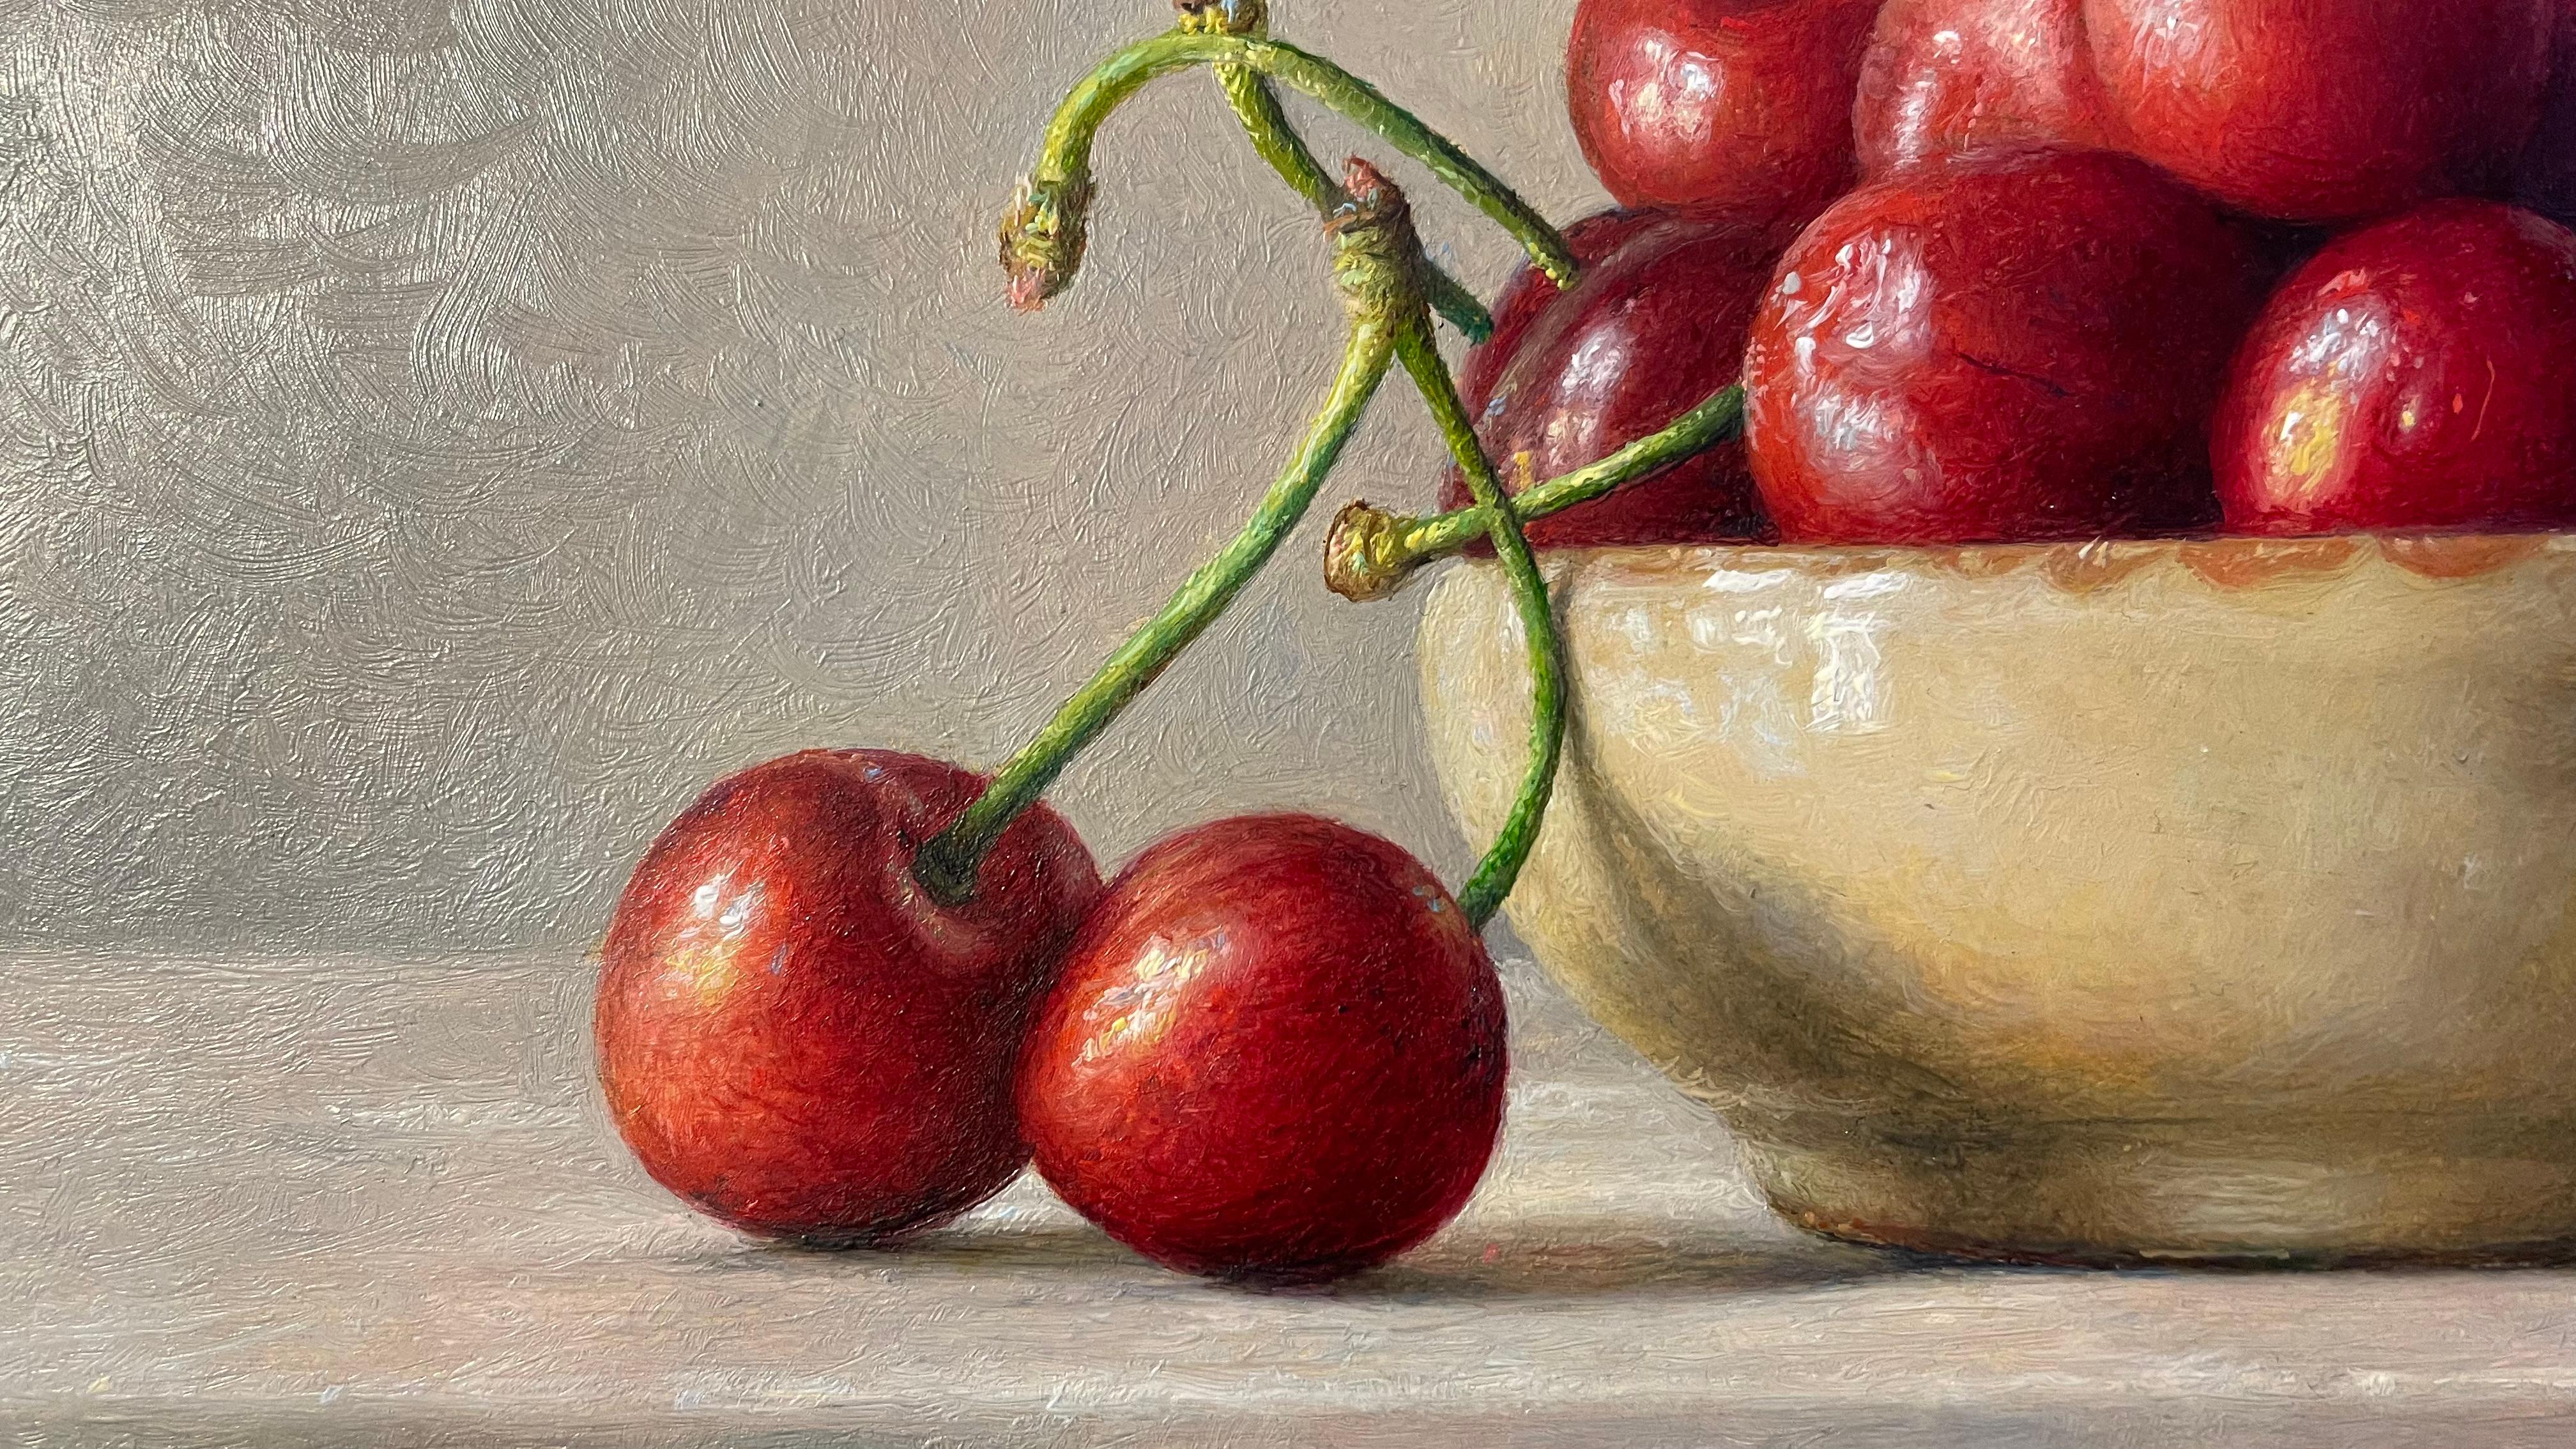 Superb oil painting of plentiful bowl of cherries by italian master Corona - Painting by Gianluca Corona